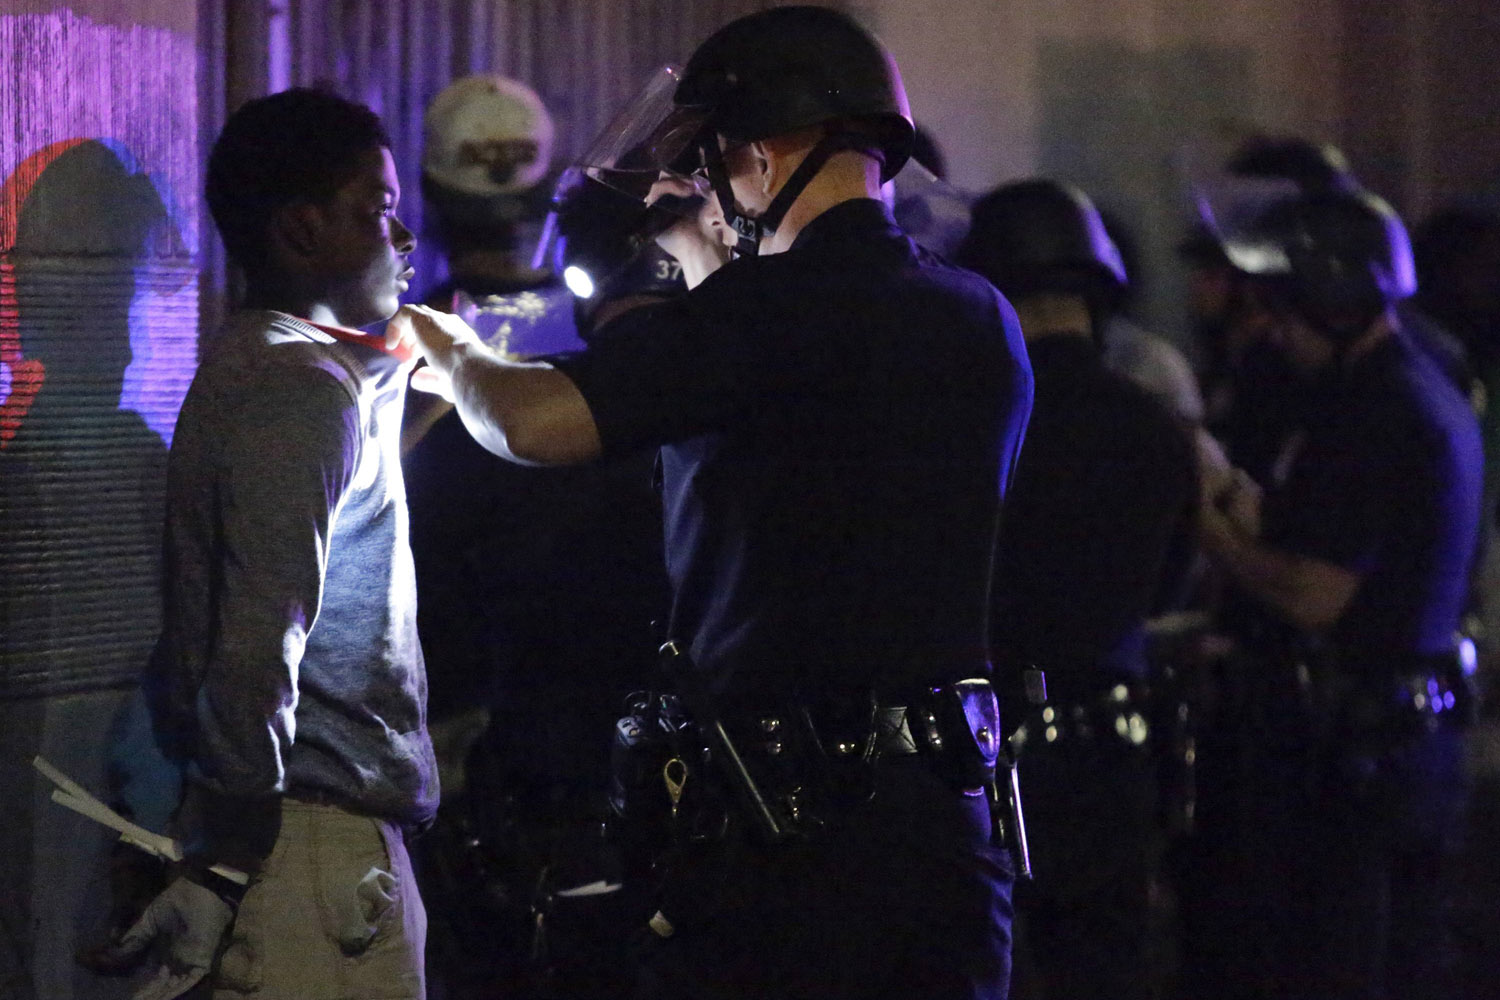 July 15, 2013. Los Angeles police arrest about a dozen people after a peaceful protest supporting Trayvon Martin turned unlawful in the Leimert Park neighborhood Los Angeles, Calif.